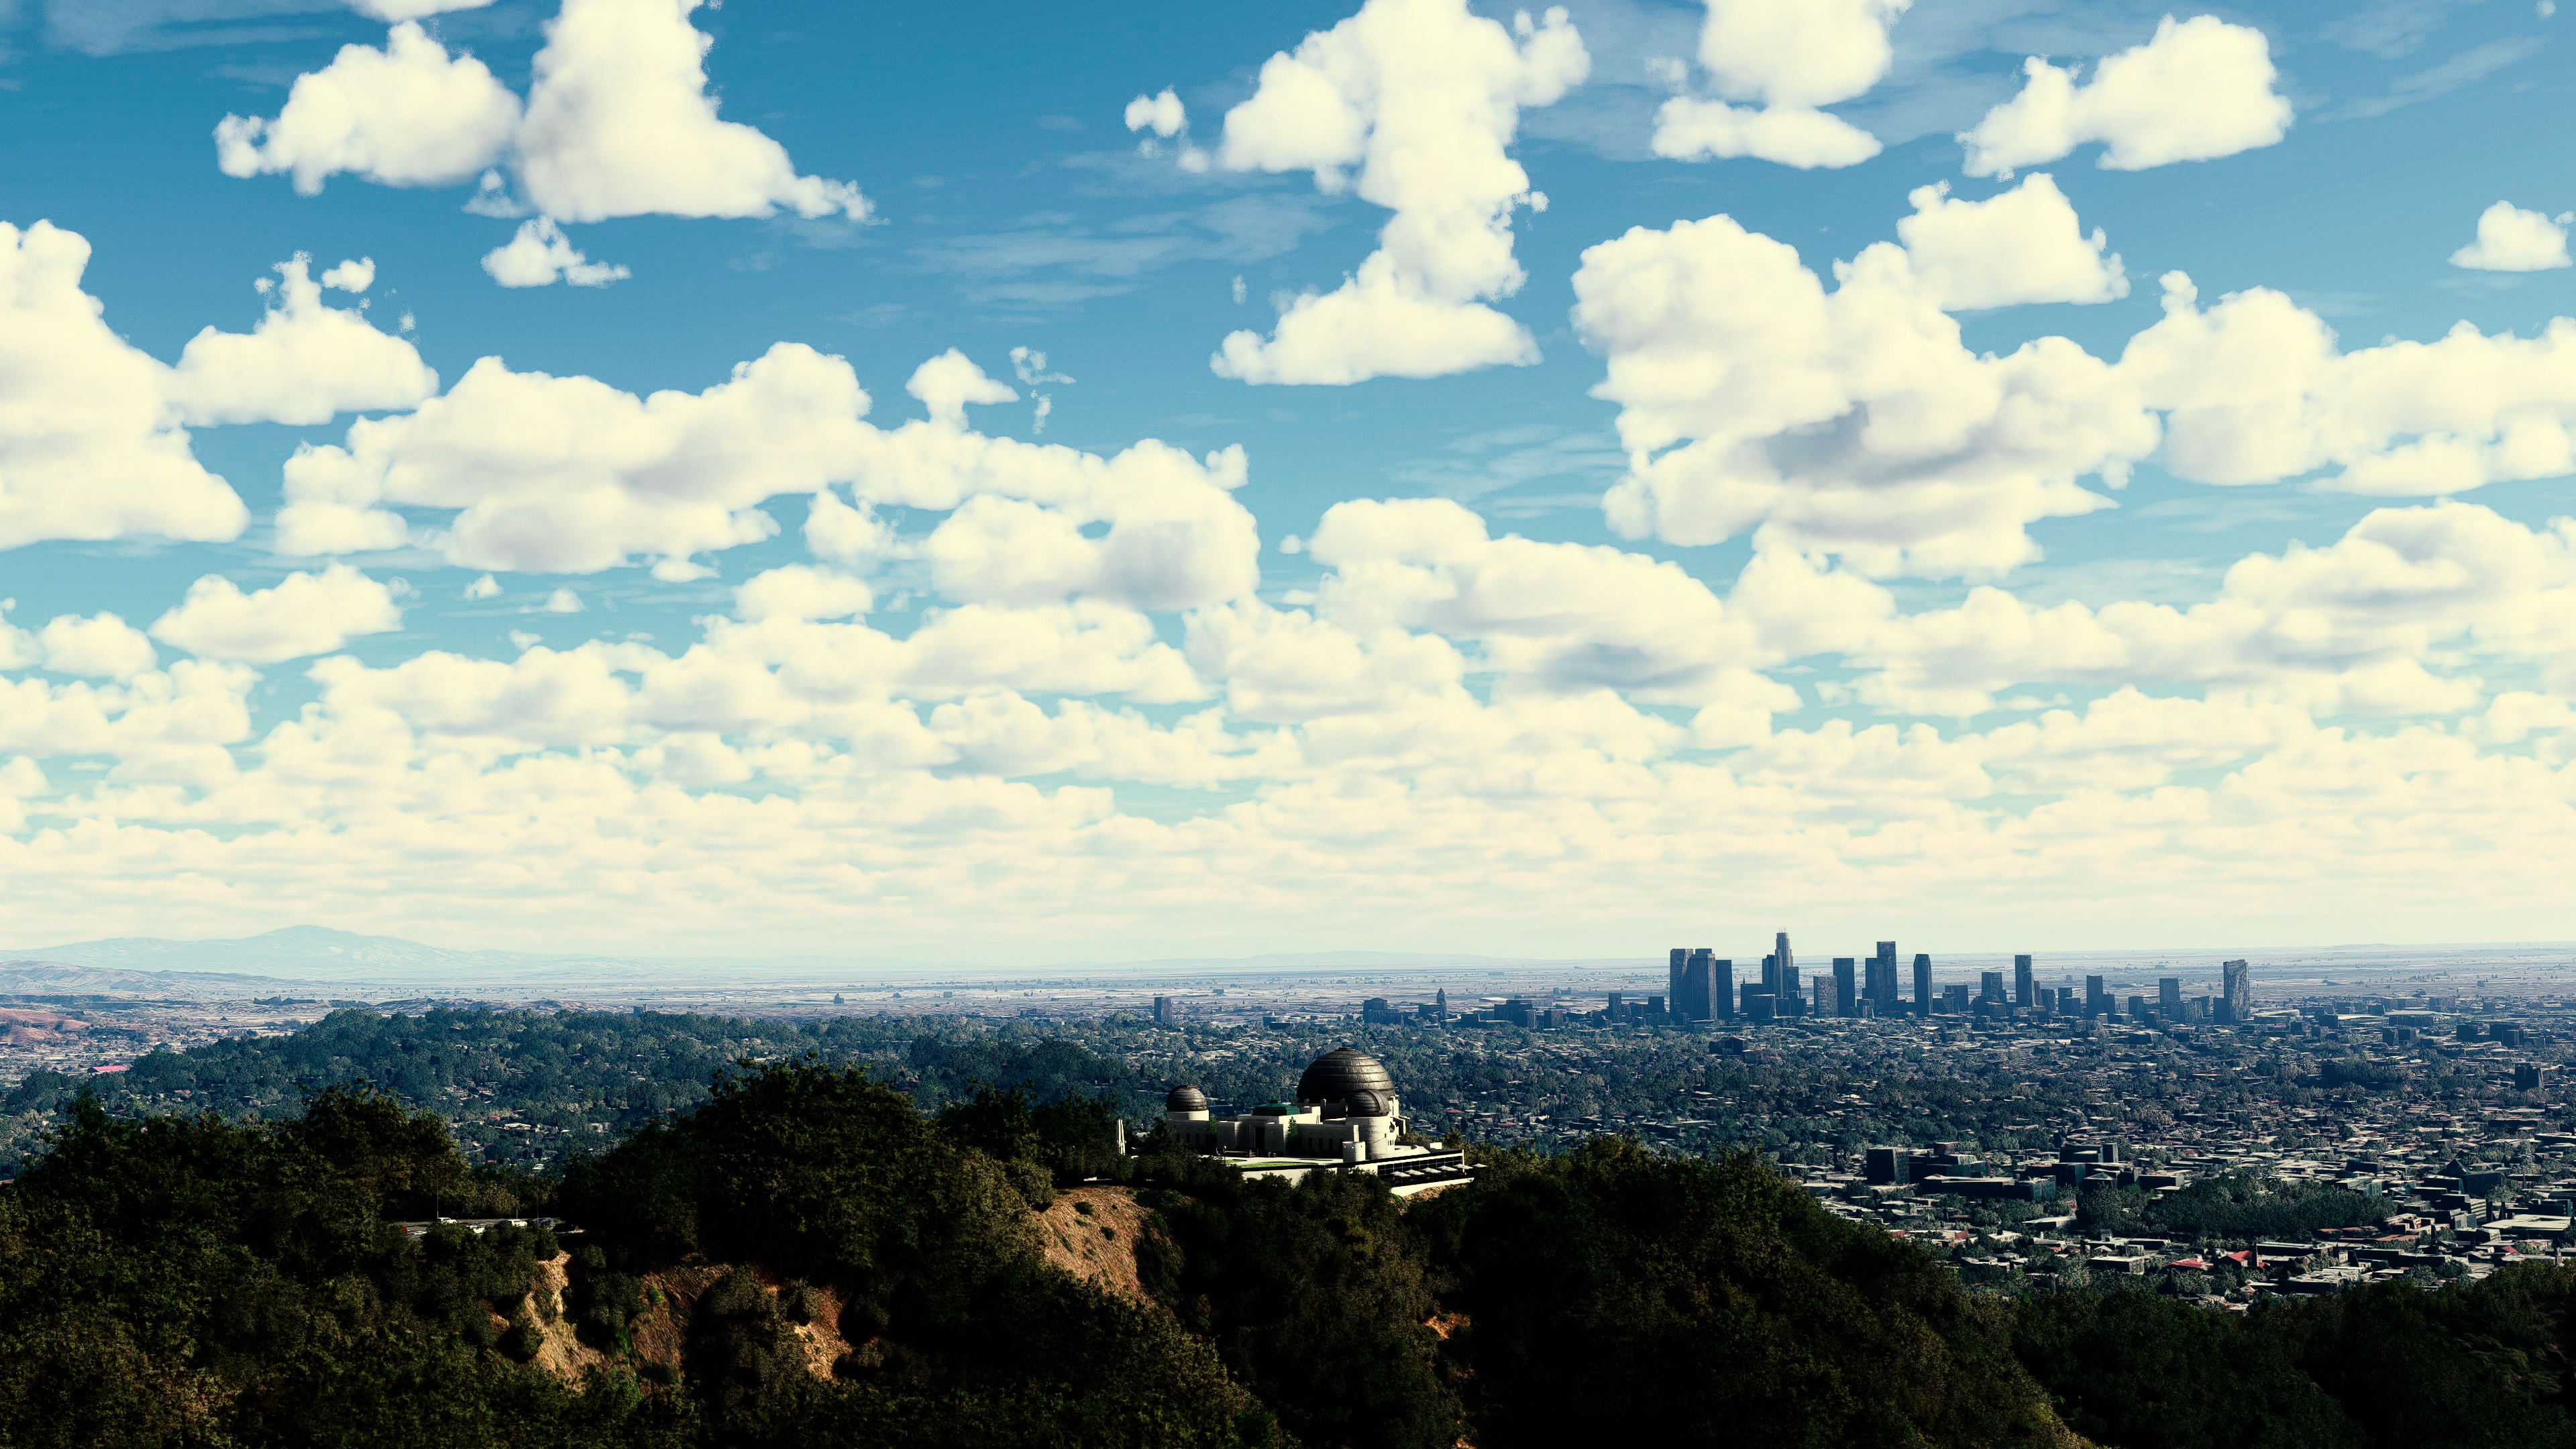 General 3840x2160 Griffith Observatory flight simulator city sunset Los Angeles sky clouds cityscape video games